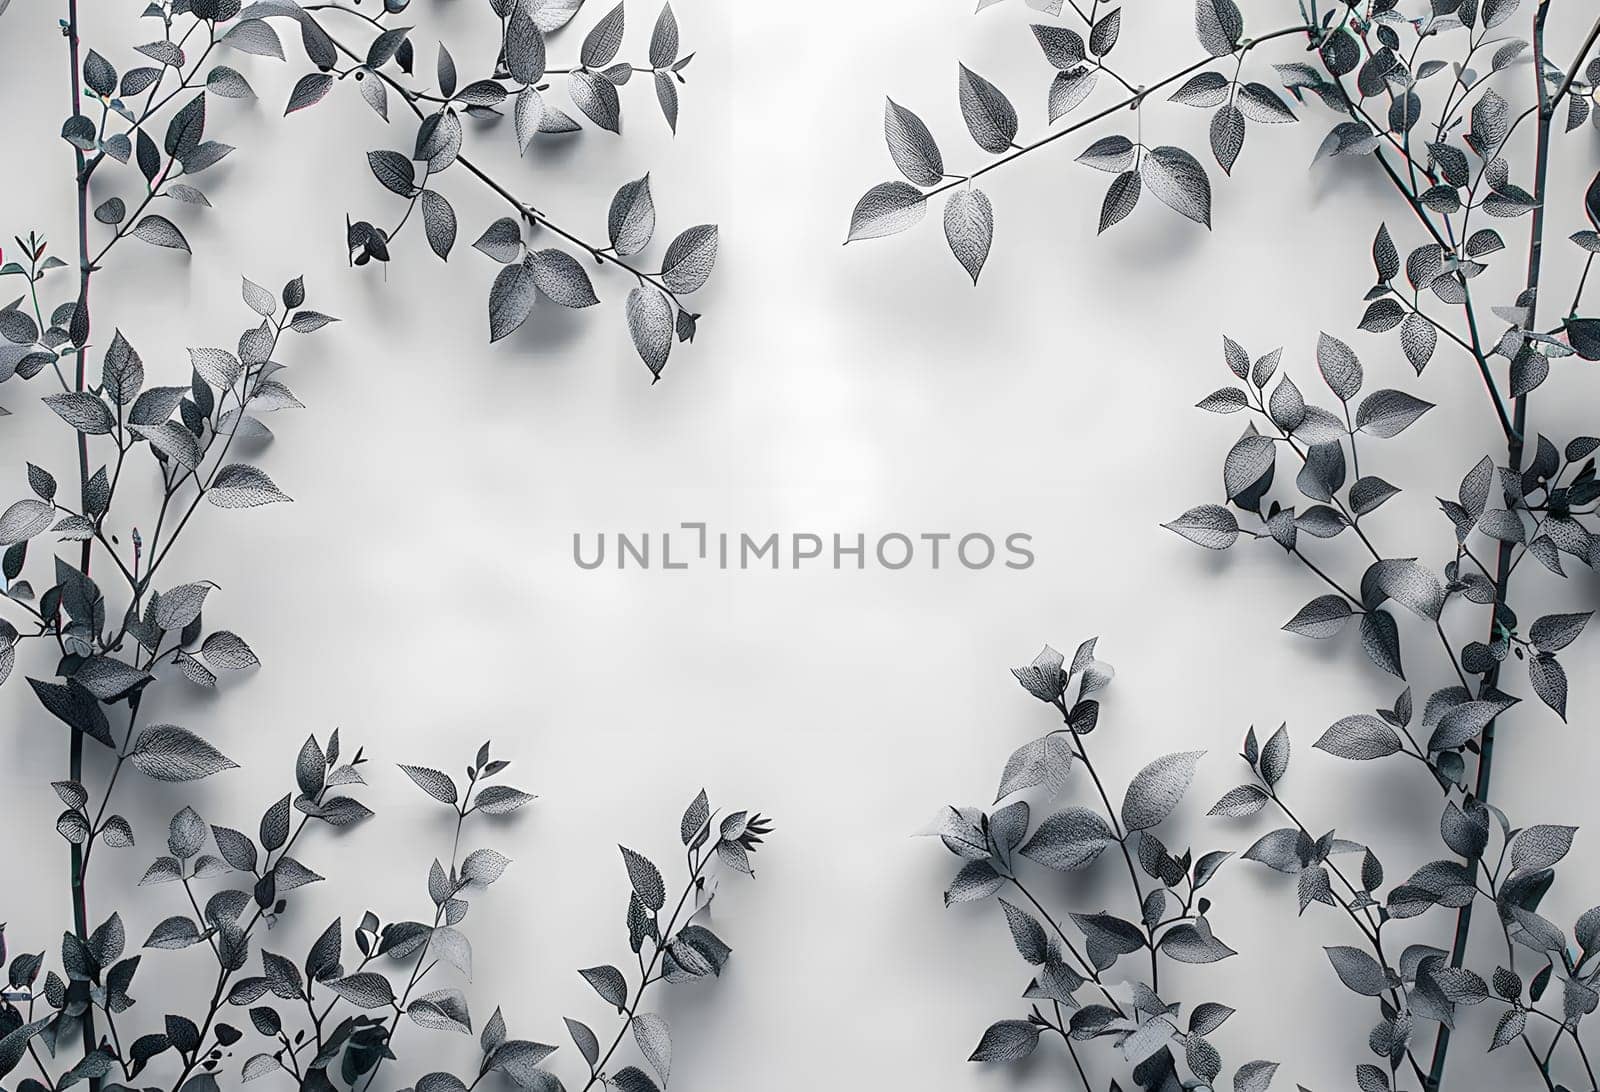 A monochrome photo of a plant twig against a white background by Nadtochiy